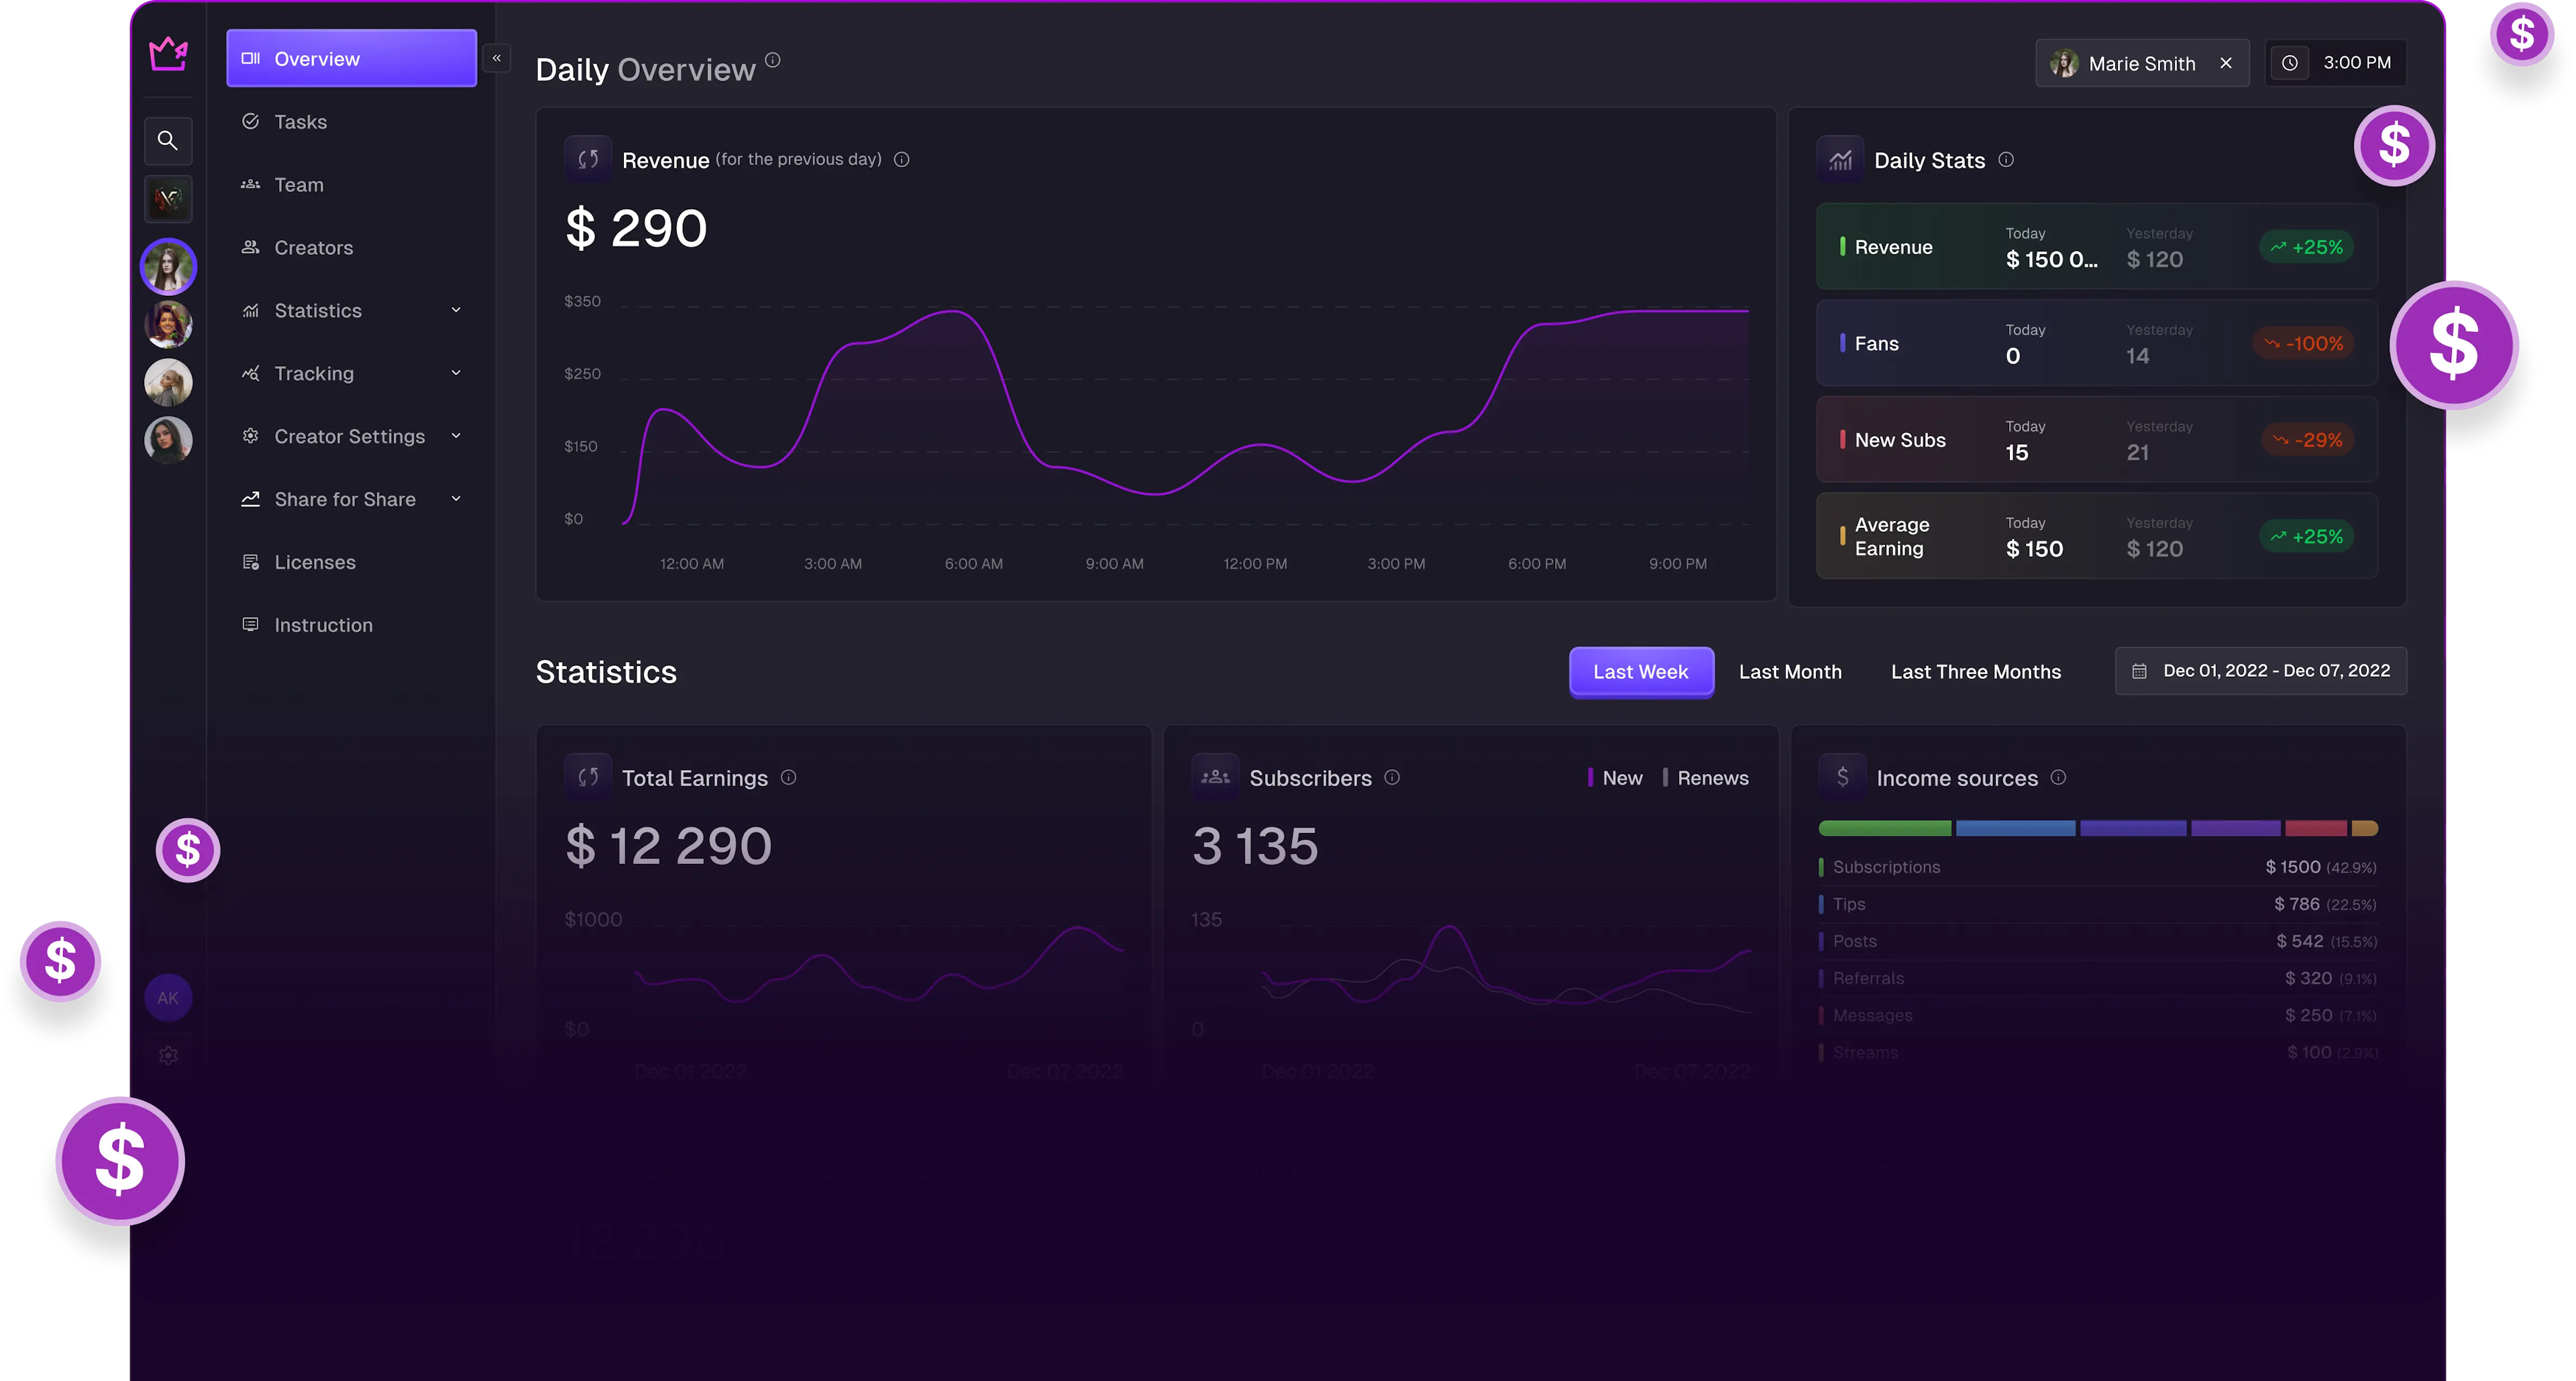 Dashboard for Top Creators displaying daily revenue trend, total earnings graph, subscriber count, daily stats including revenue, fans, new subscriptions, and average earning, as well as a breakdown of income sources like subscriptions, tips, posts, referrals, messages, and streams.